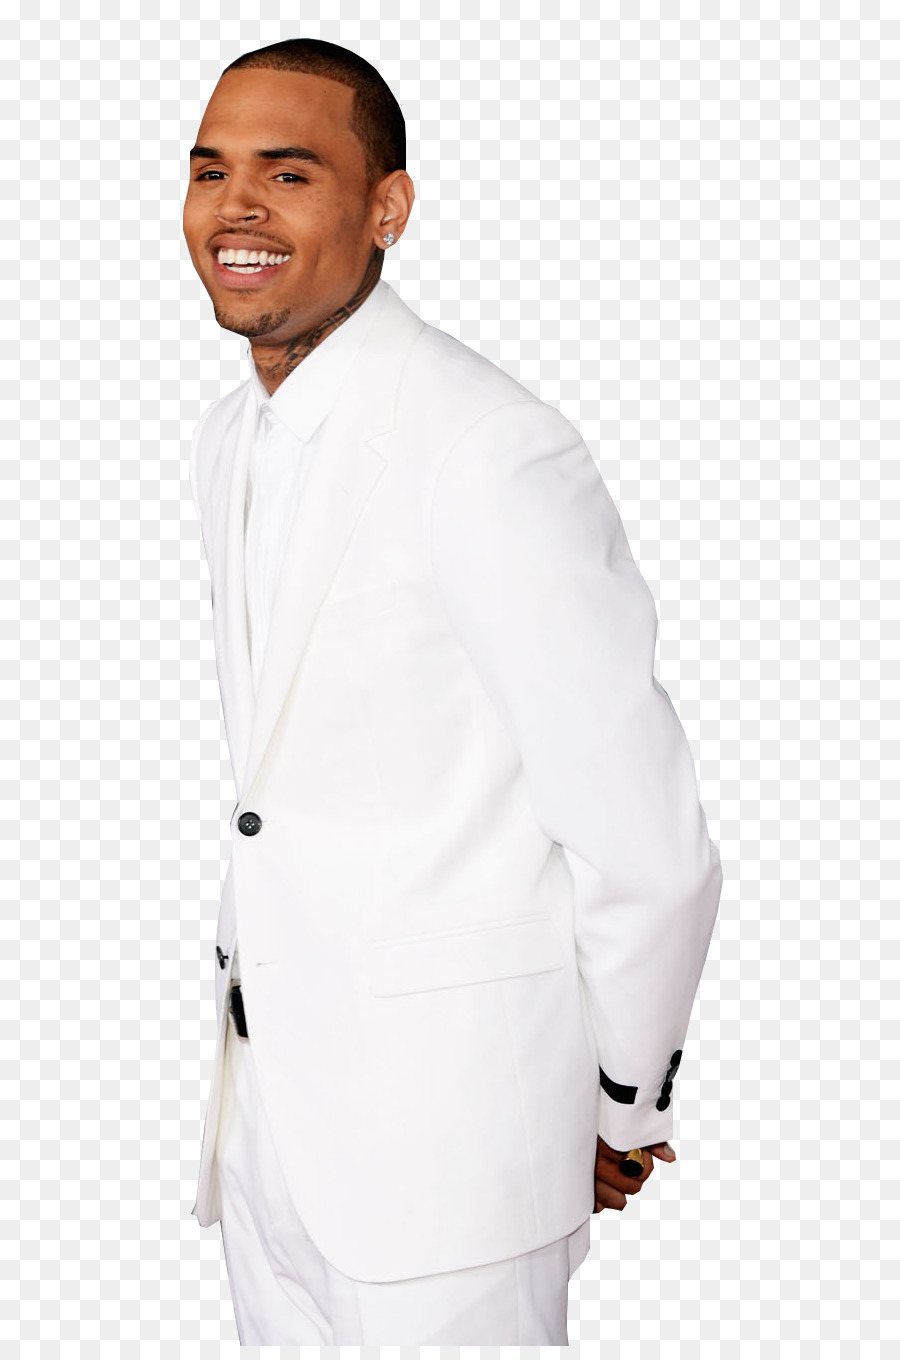 Chris Brown Photography Clip art - christopher png download - 648*1346 - Free Transparent Chris Brown png Download.